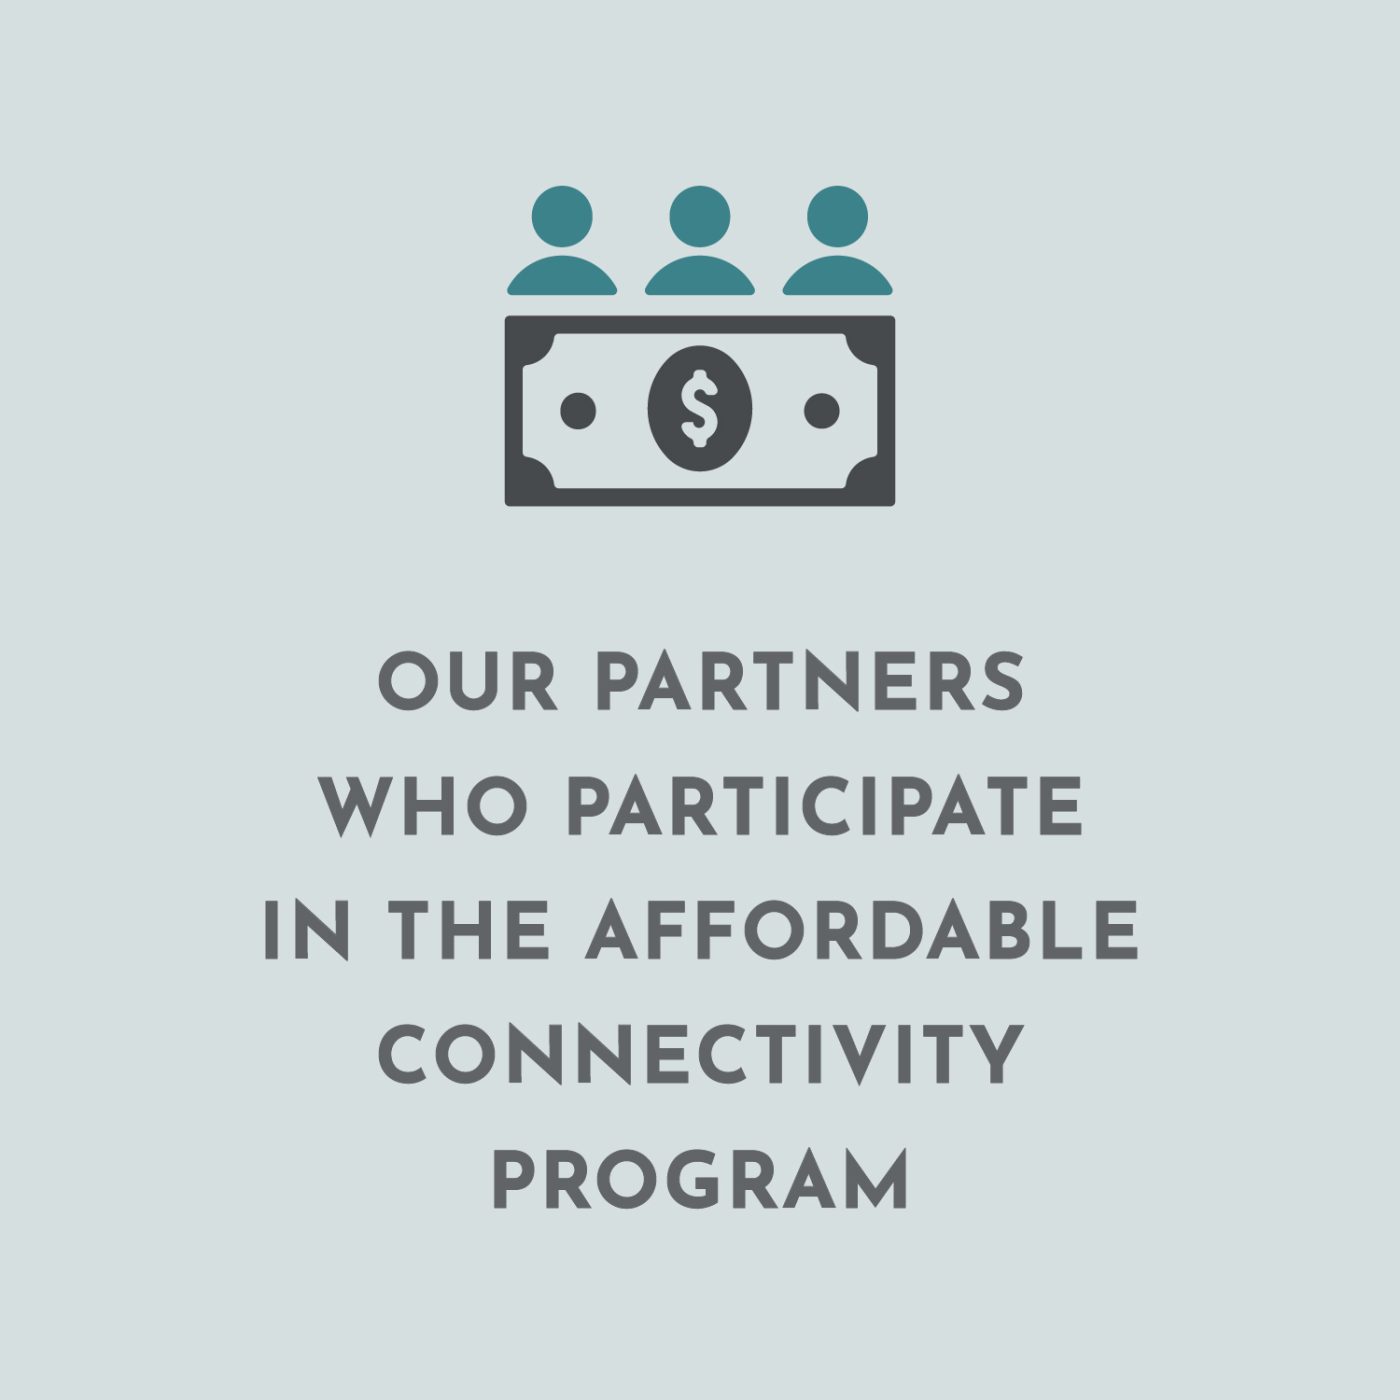 Infographic that shows an icon of three people hovering over a dollar bill on top of text "Our partners who participate in the affordable connectivity program"